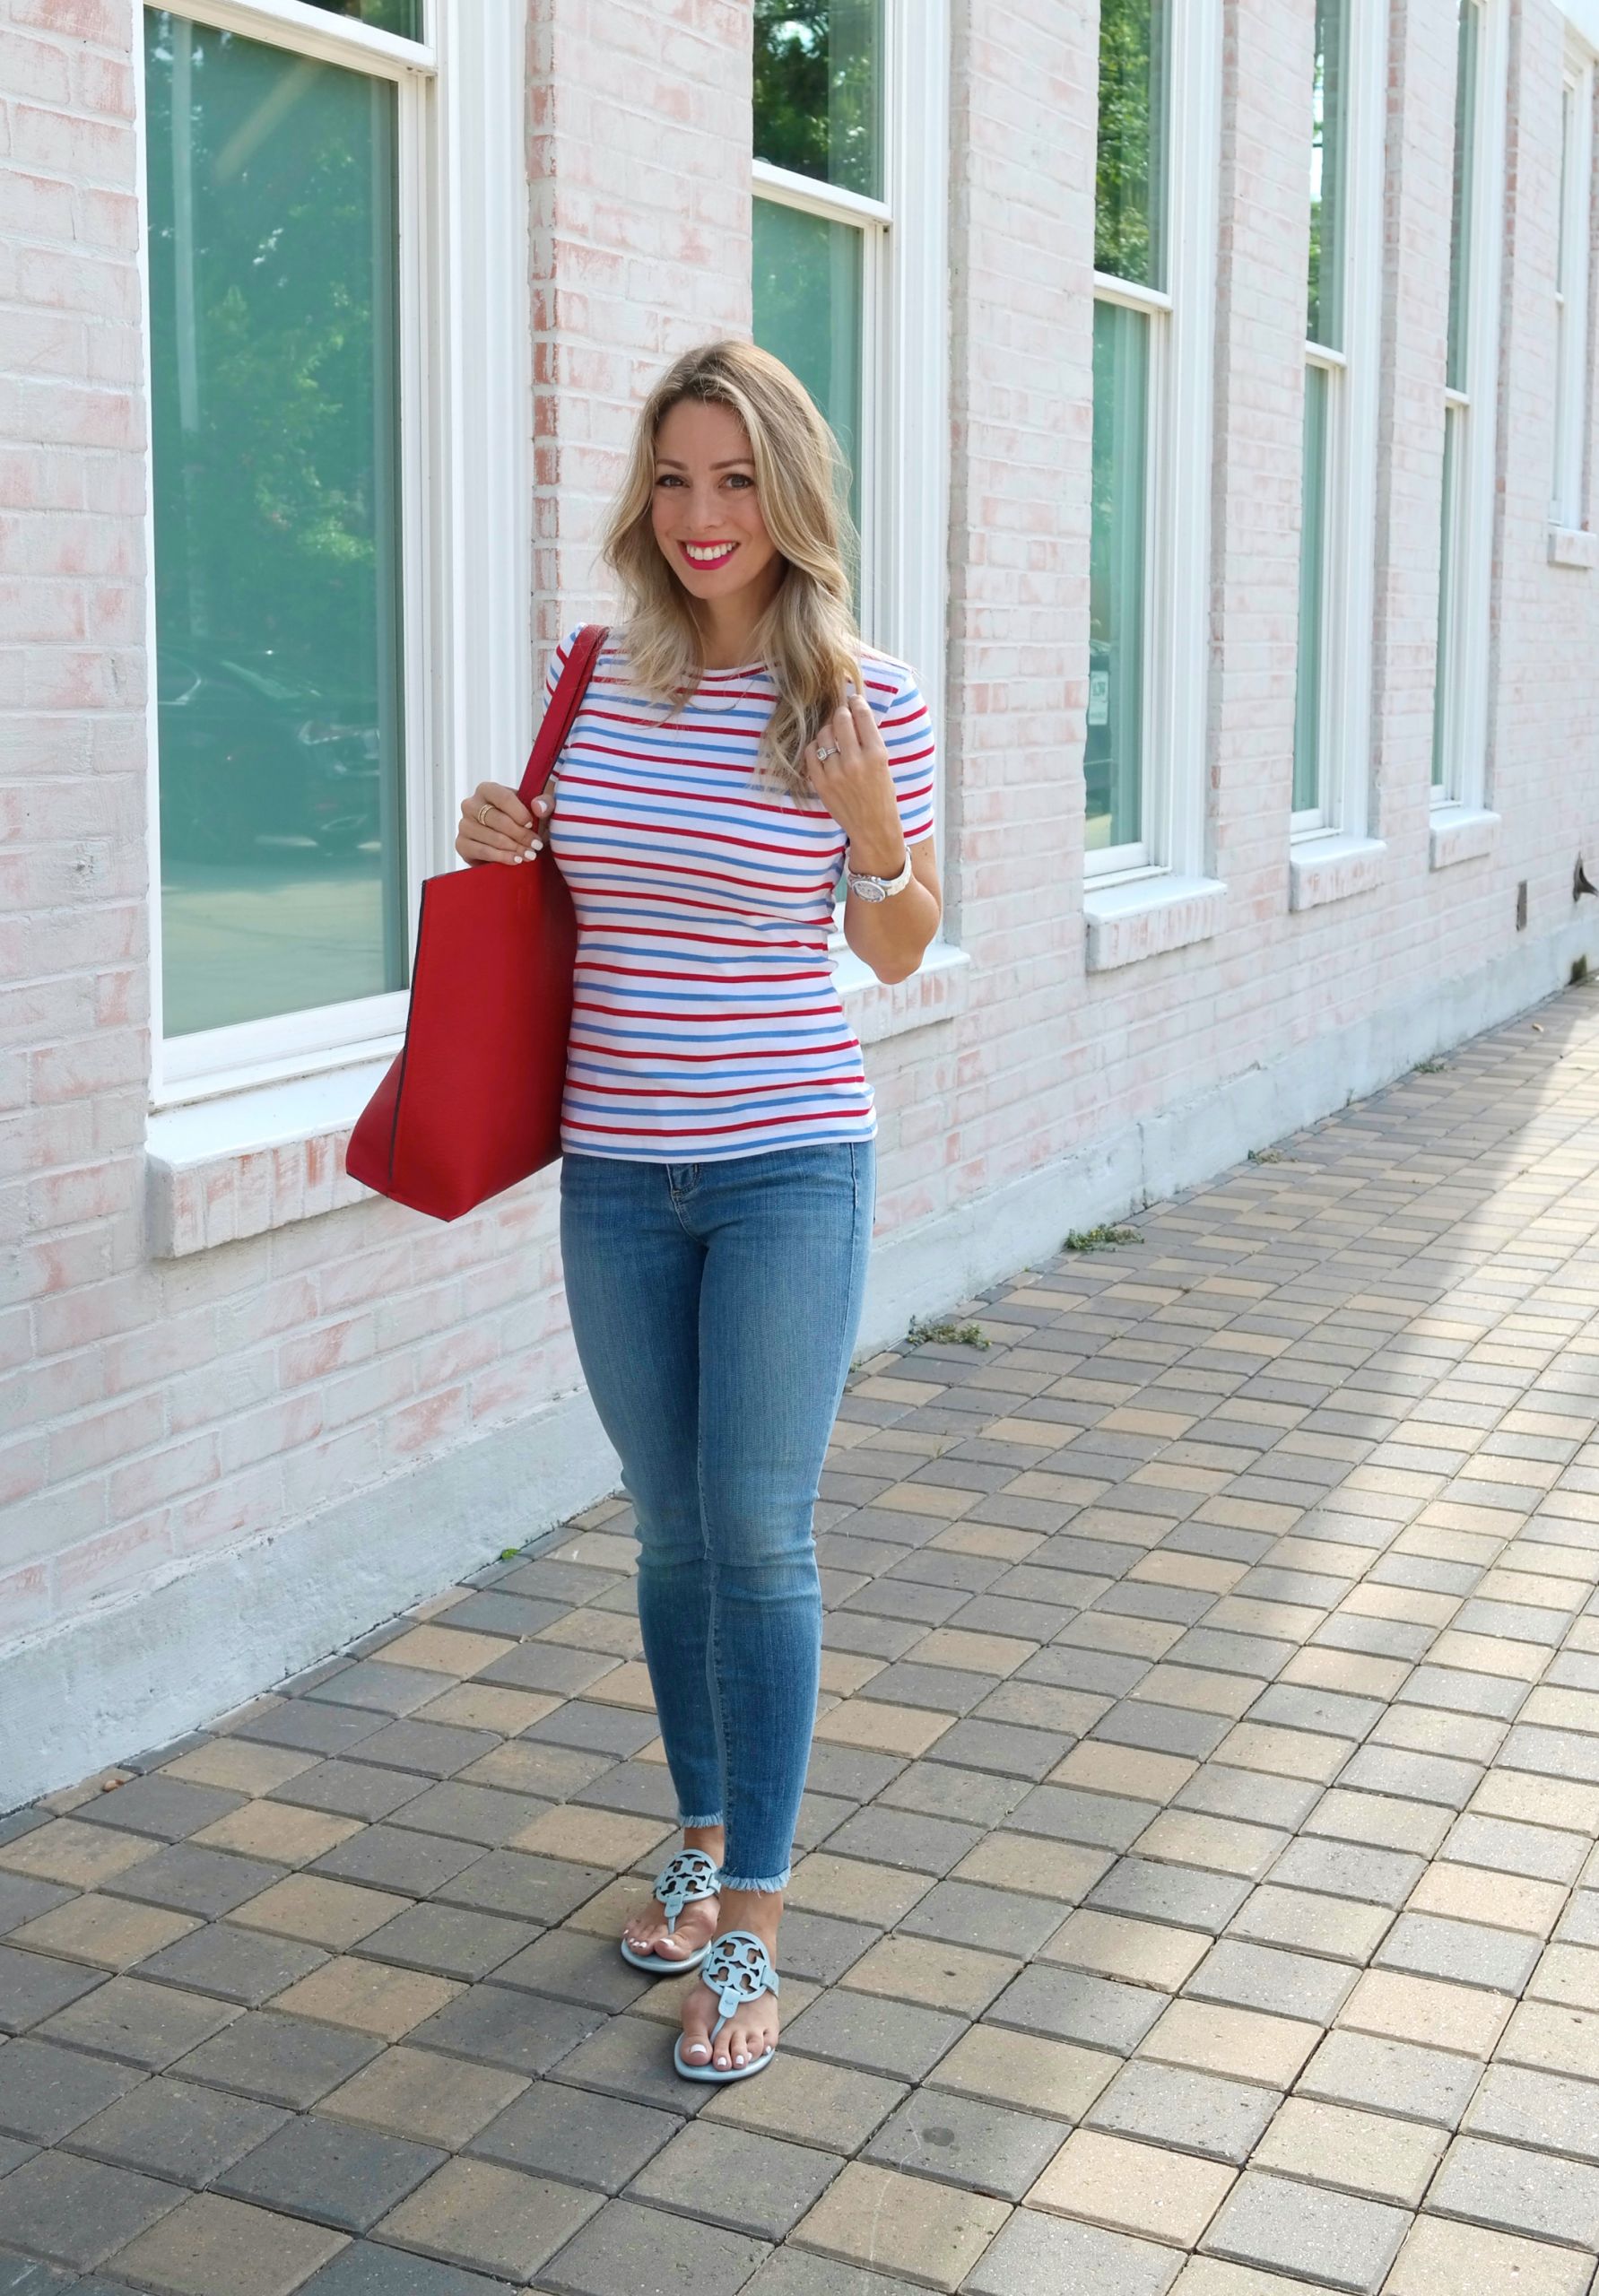 Fourth Of July Outfit Ideas
 Cute Fourth of July Outfit Ideas